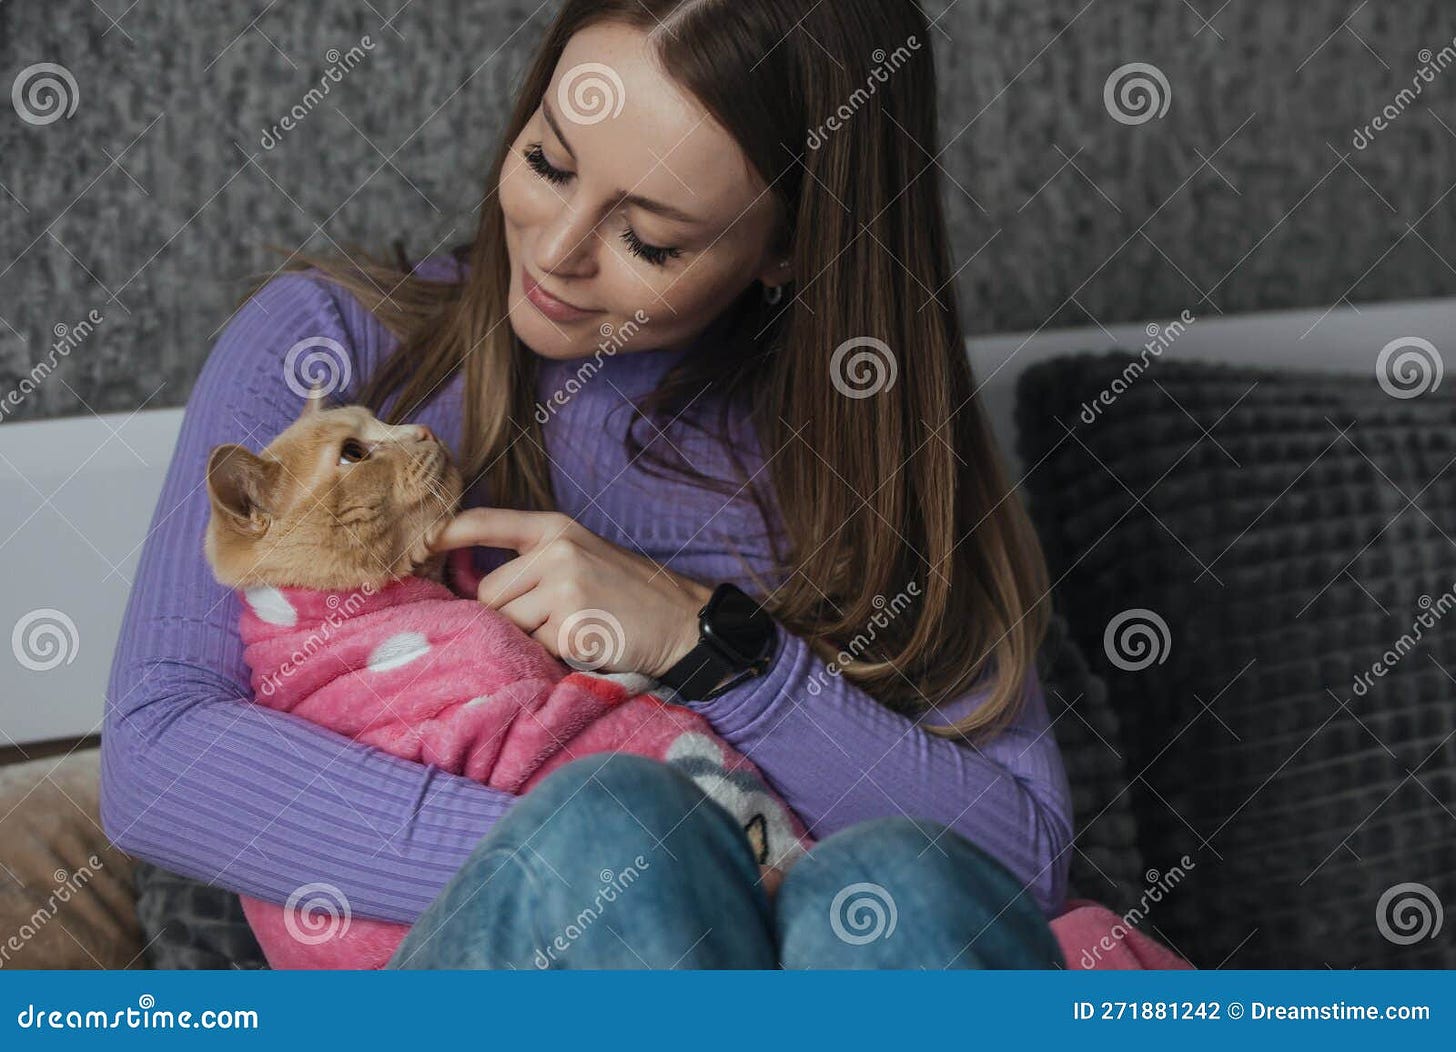 Cute domestic cat wrapped in a baby blanket in the arms of a young woman